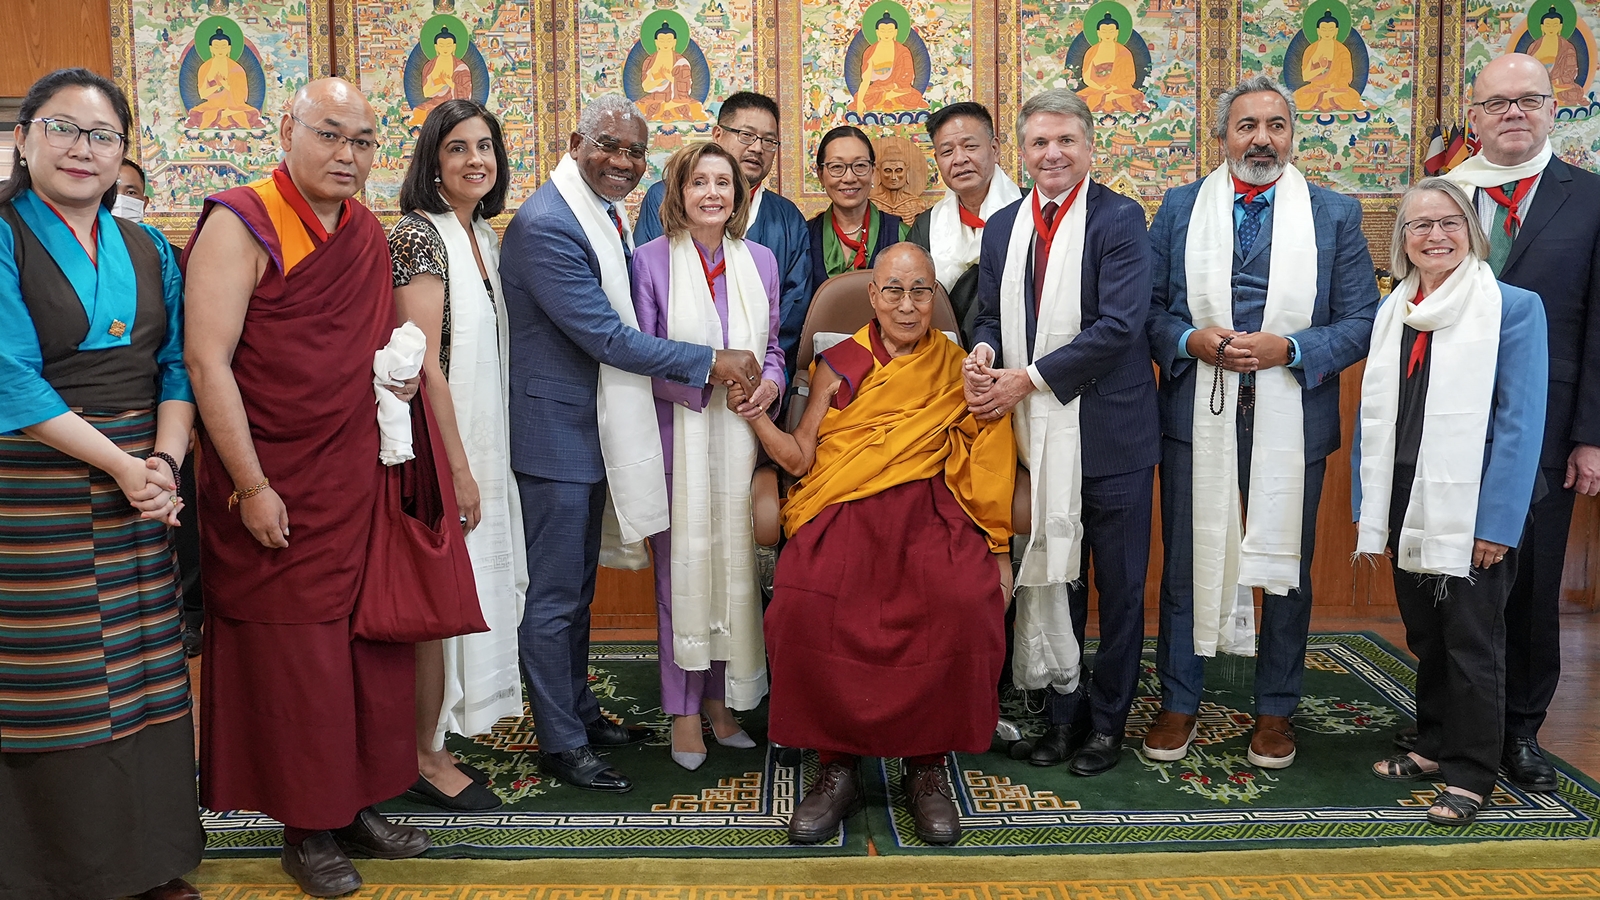 Dalai Lama’s legacy will live on and Xi will be gone, says Pelosi